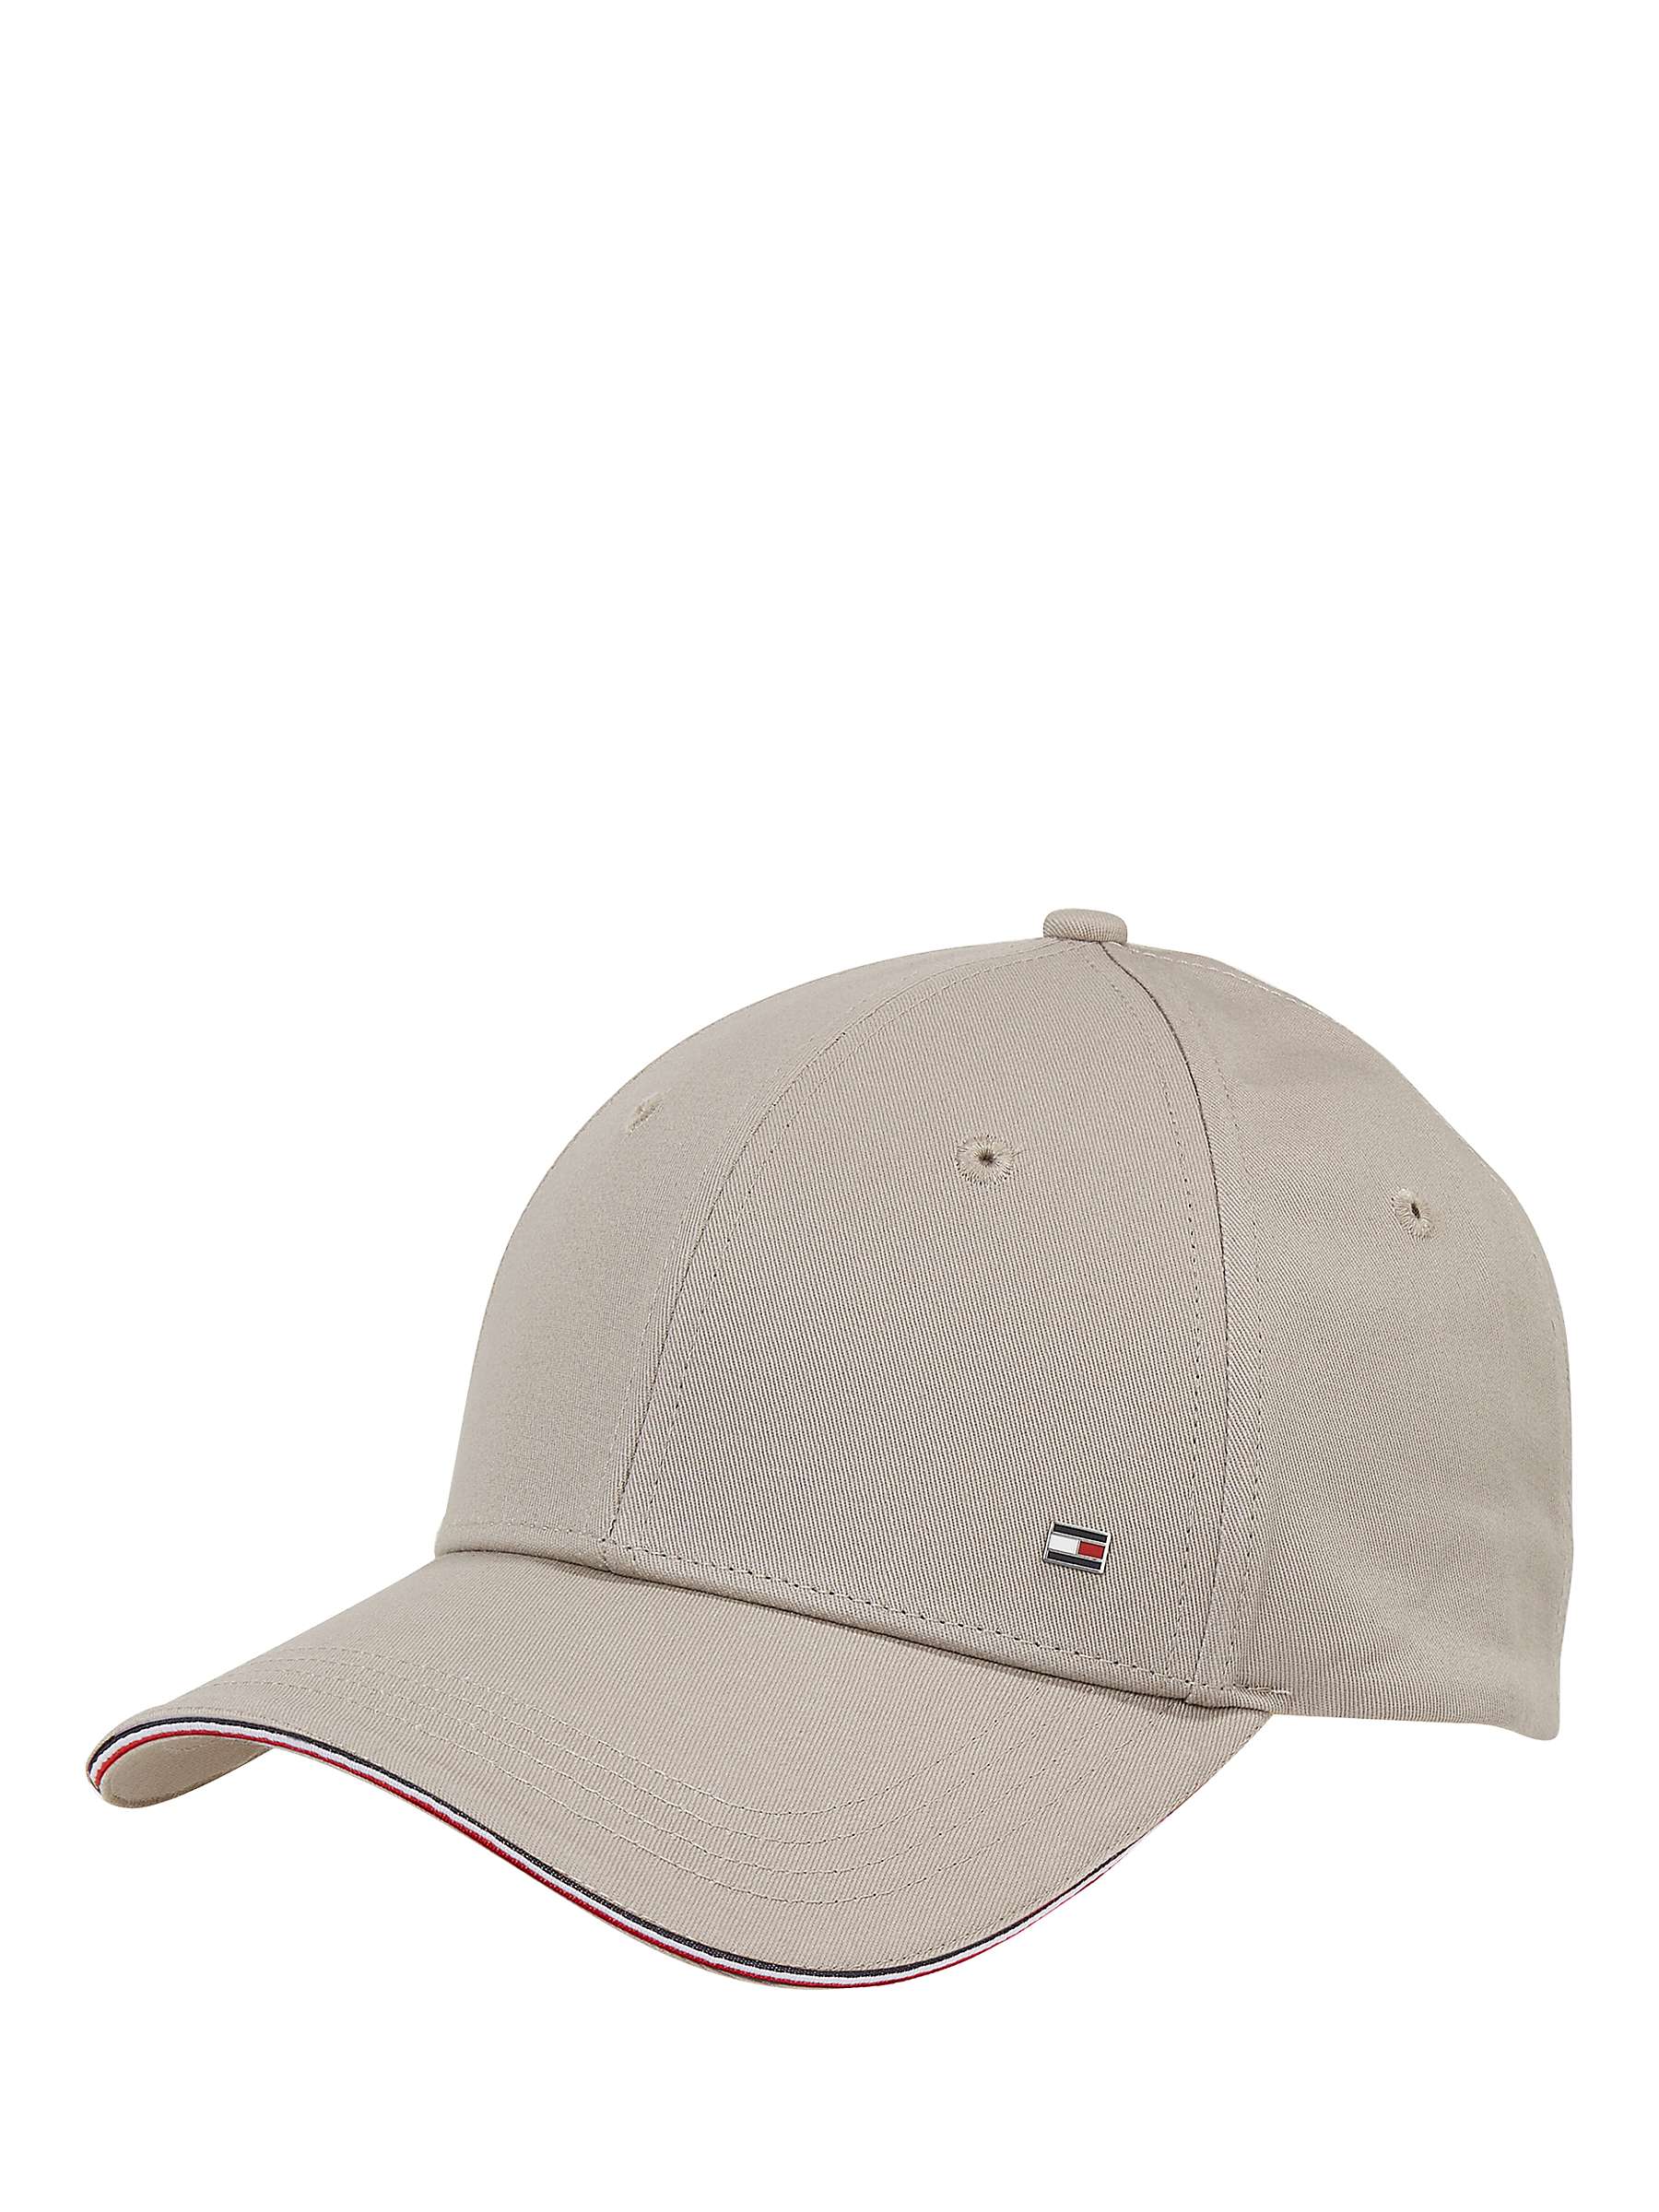 Buy Tommy Hilfiger Organic Cotton Corporate Baseball Cap, Taupe Online at johnlewis.com